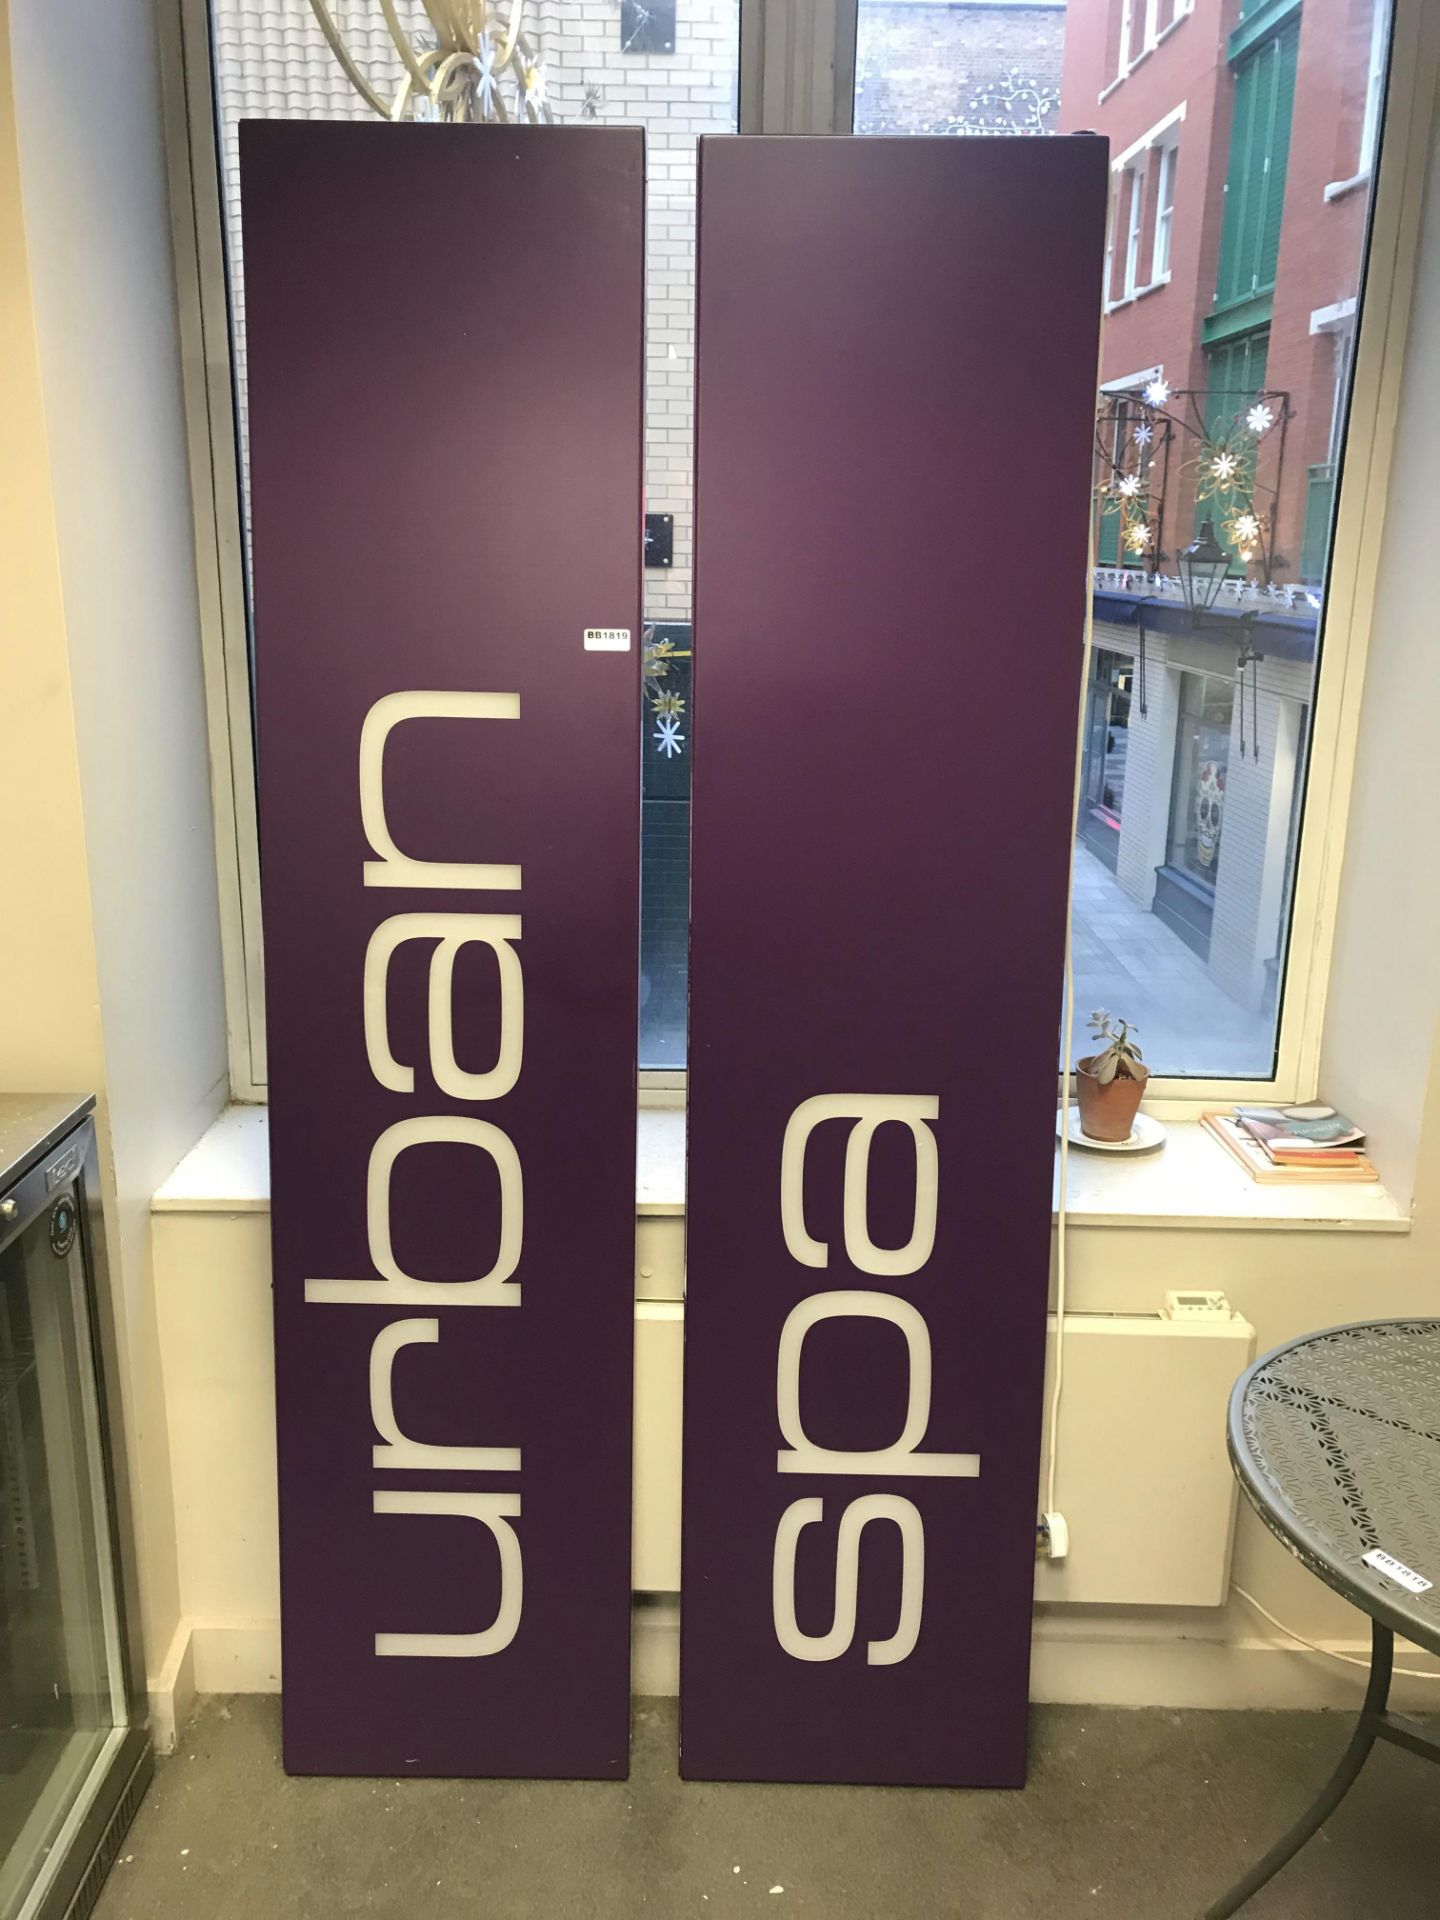 2 x Large Illumatinated Bespoke Light Boxes - URBAN SPA - Contemporary Purple Design With Cool White - Image 3 of 5